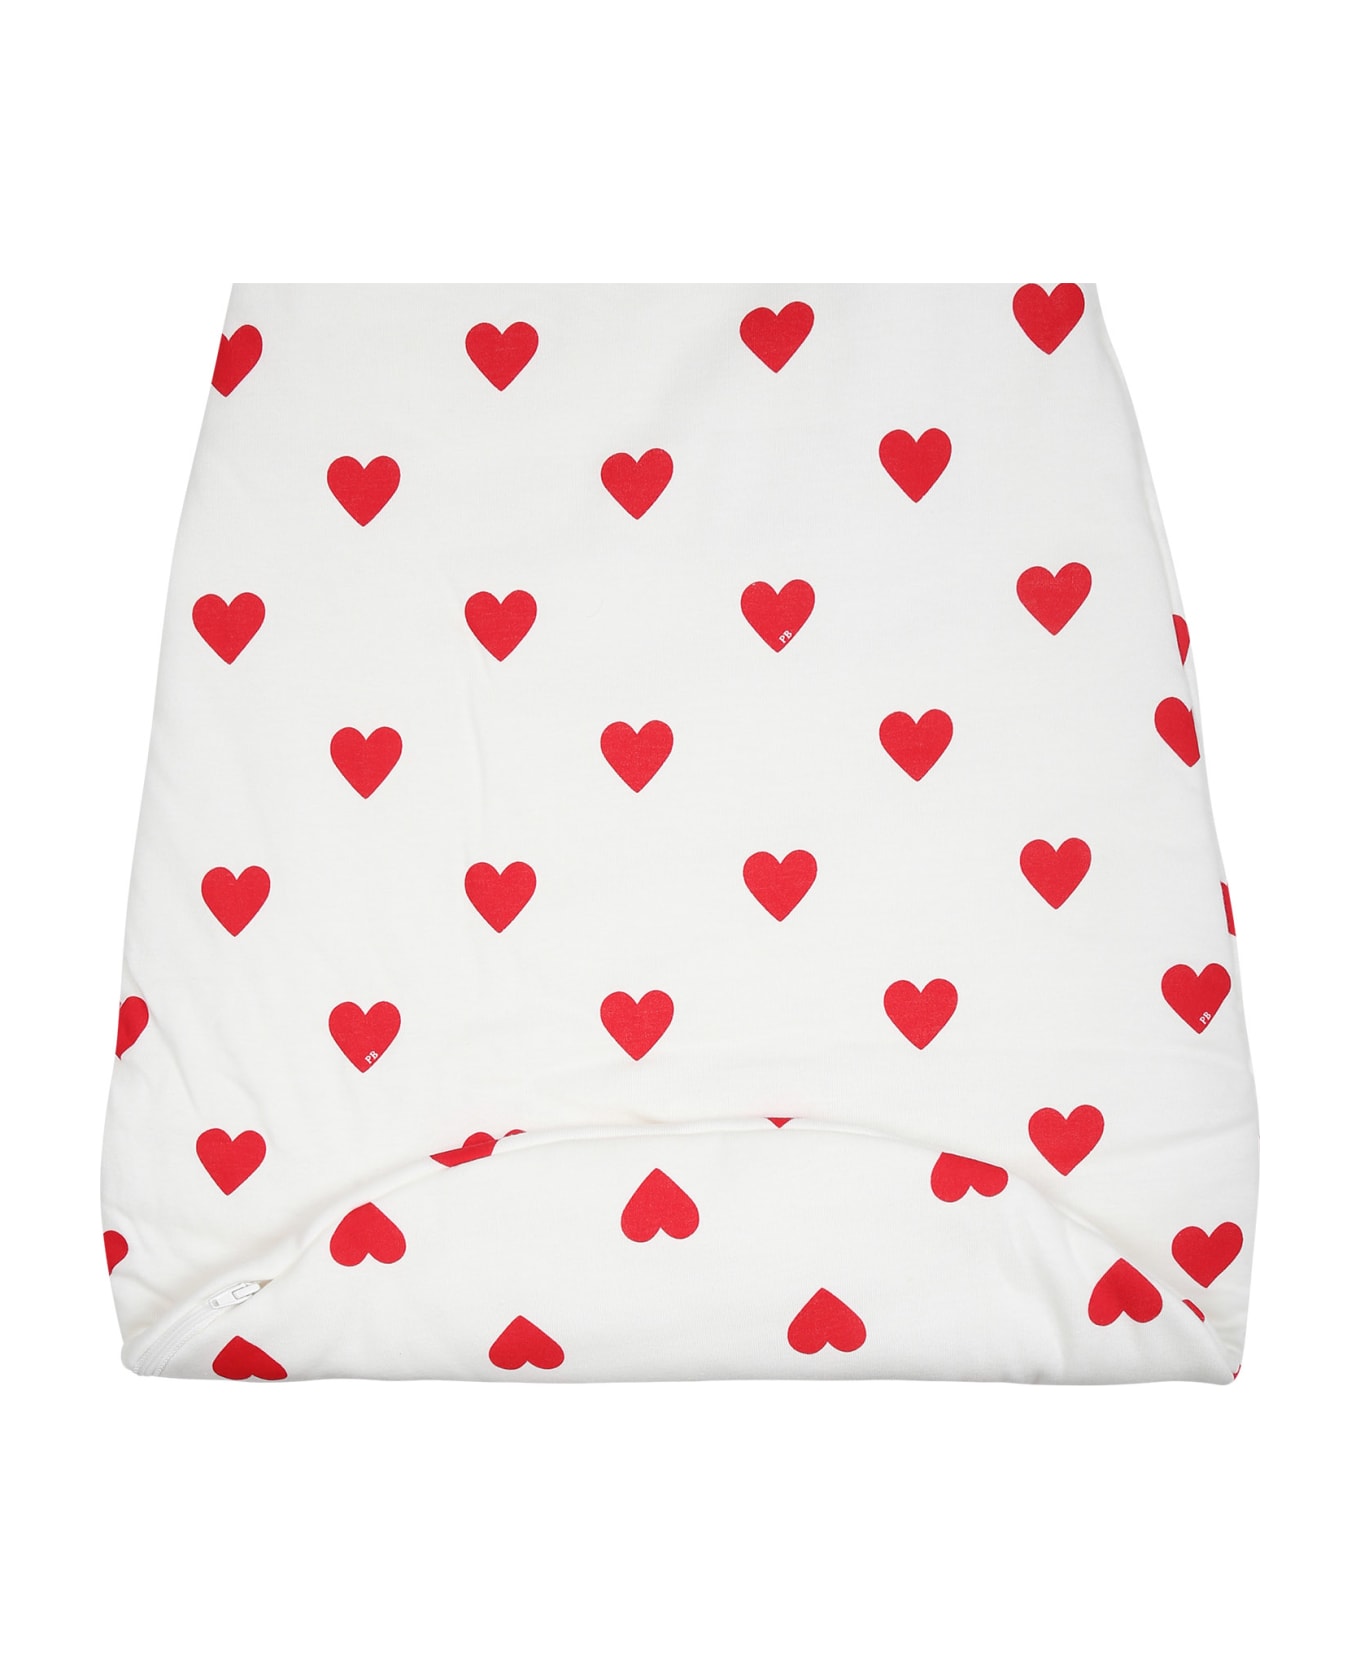 Petit Bateau White Sleeping Bag For Baby Girl With Hearts - White